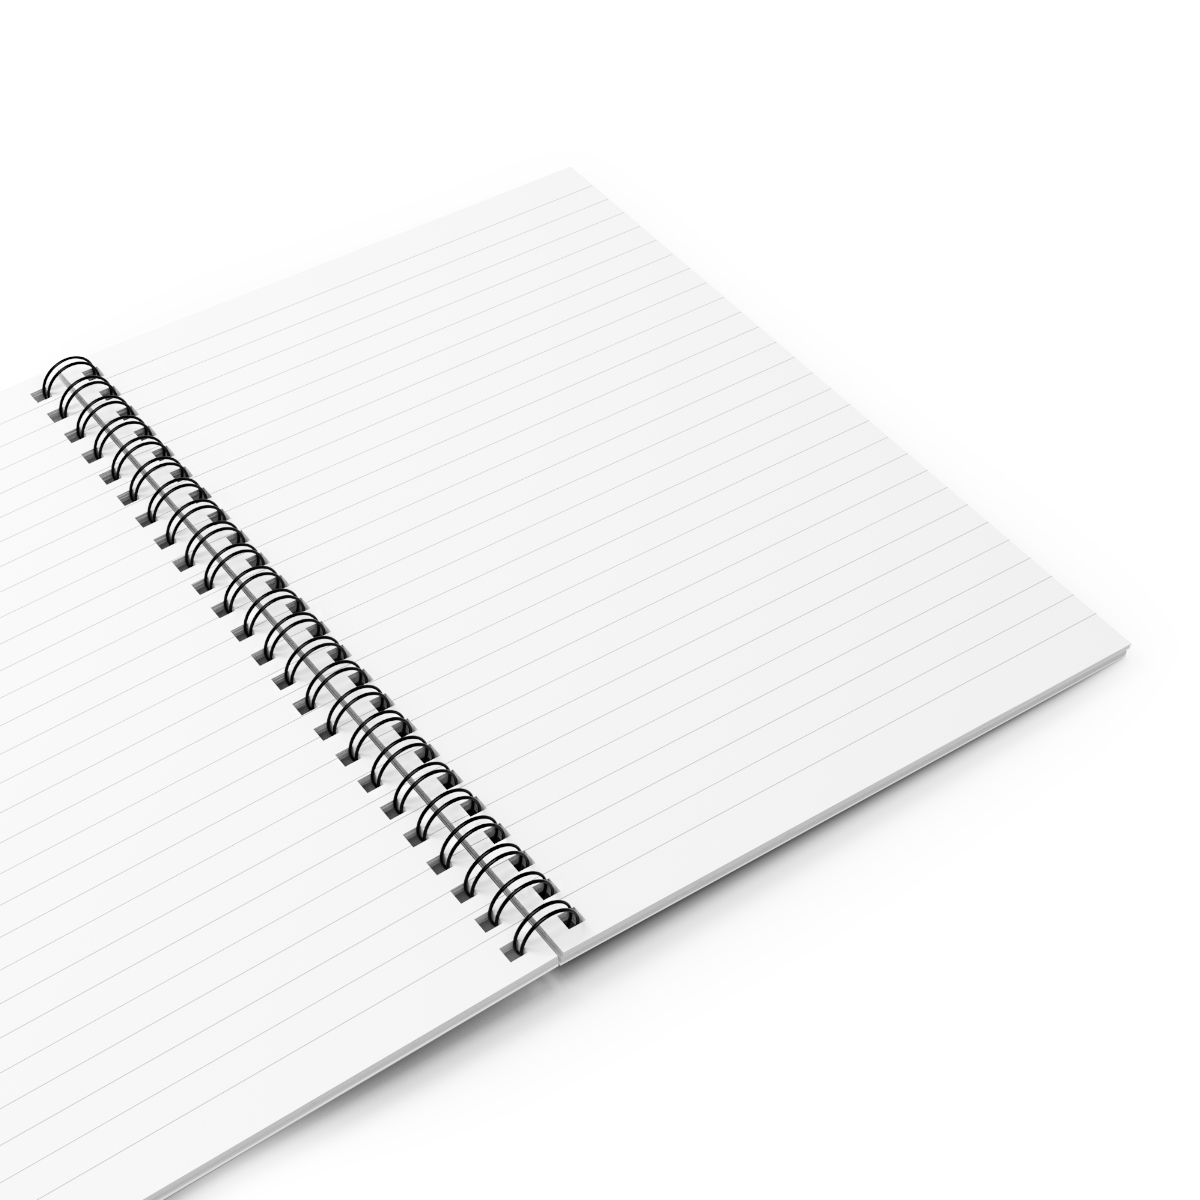 Back To School Notebook product thumbnail image